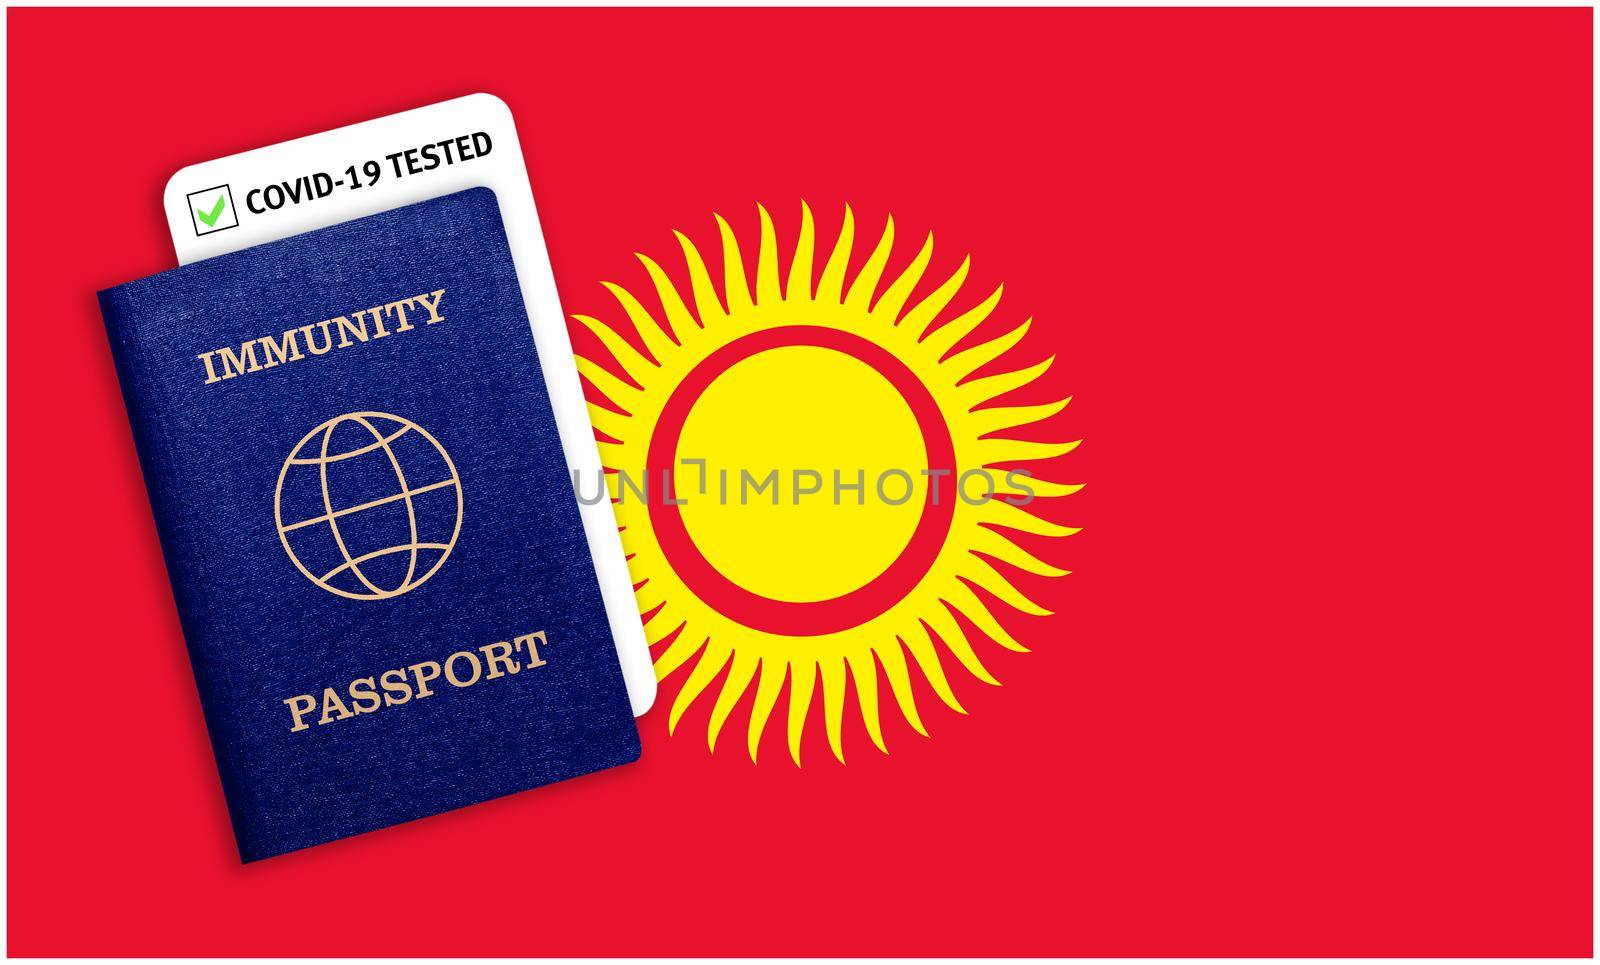 Immunity passport and test result for COVID-19 on flag of Kyrgyzstan by galinasharapova